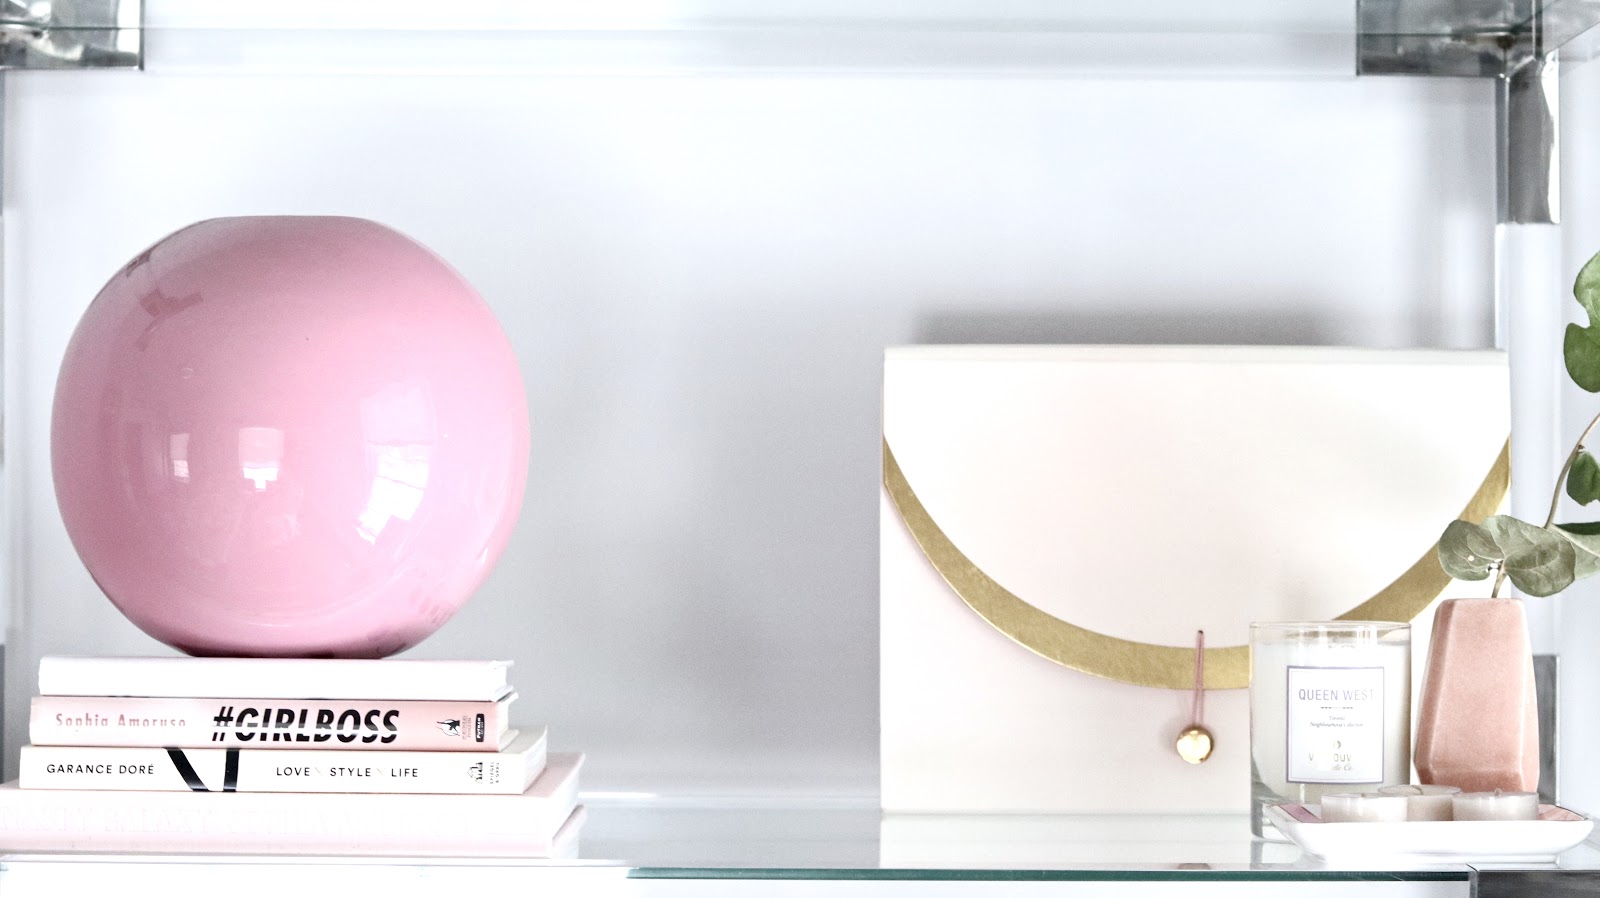 Chic and Practical Guide to Styling a Shelf , Lucite shelf, Homesense, GirlBoss Office, Blogger Office Tour, white and pink office